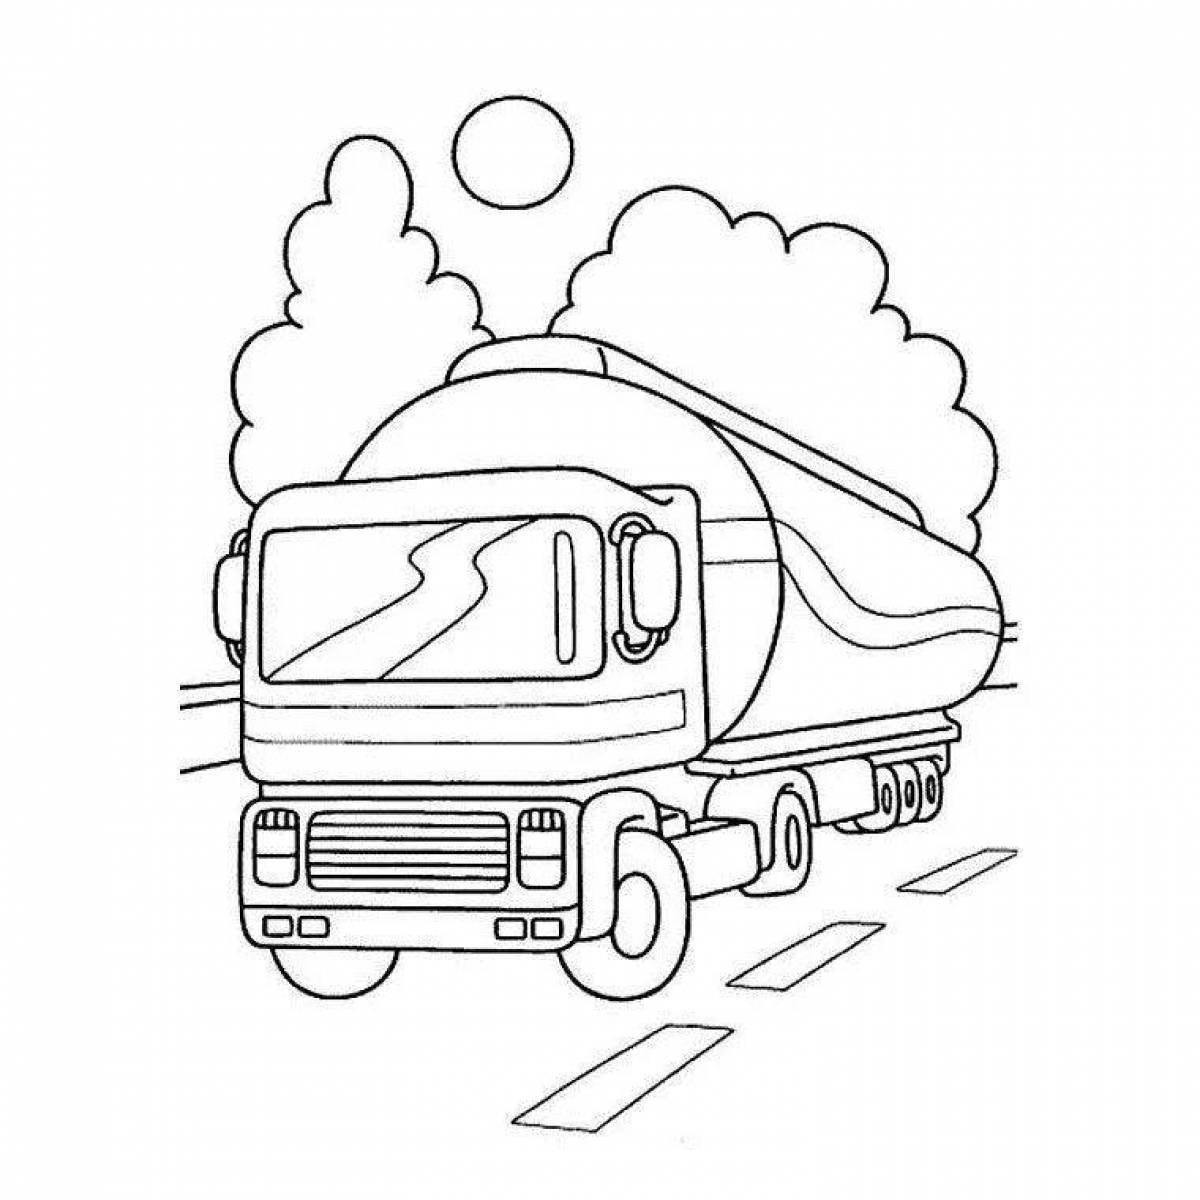 Beautiful coloring page of a fuel truck for the little ones